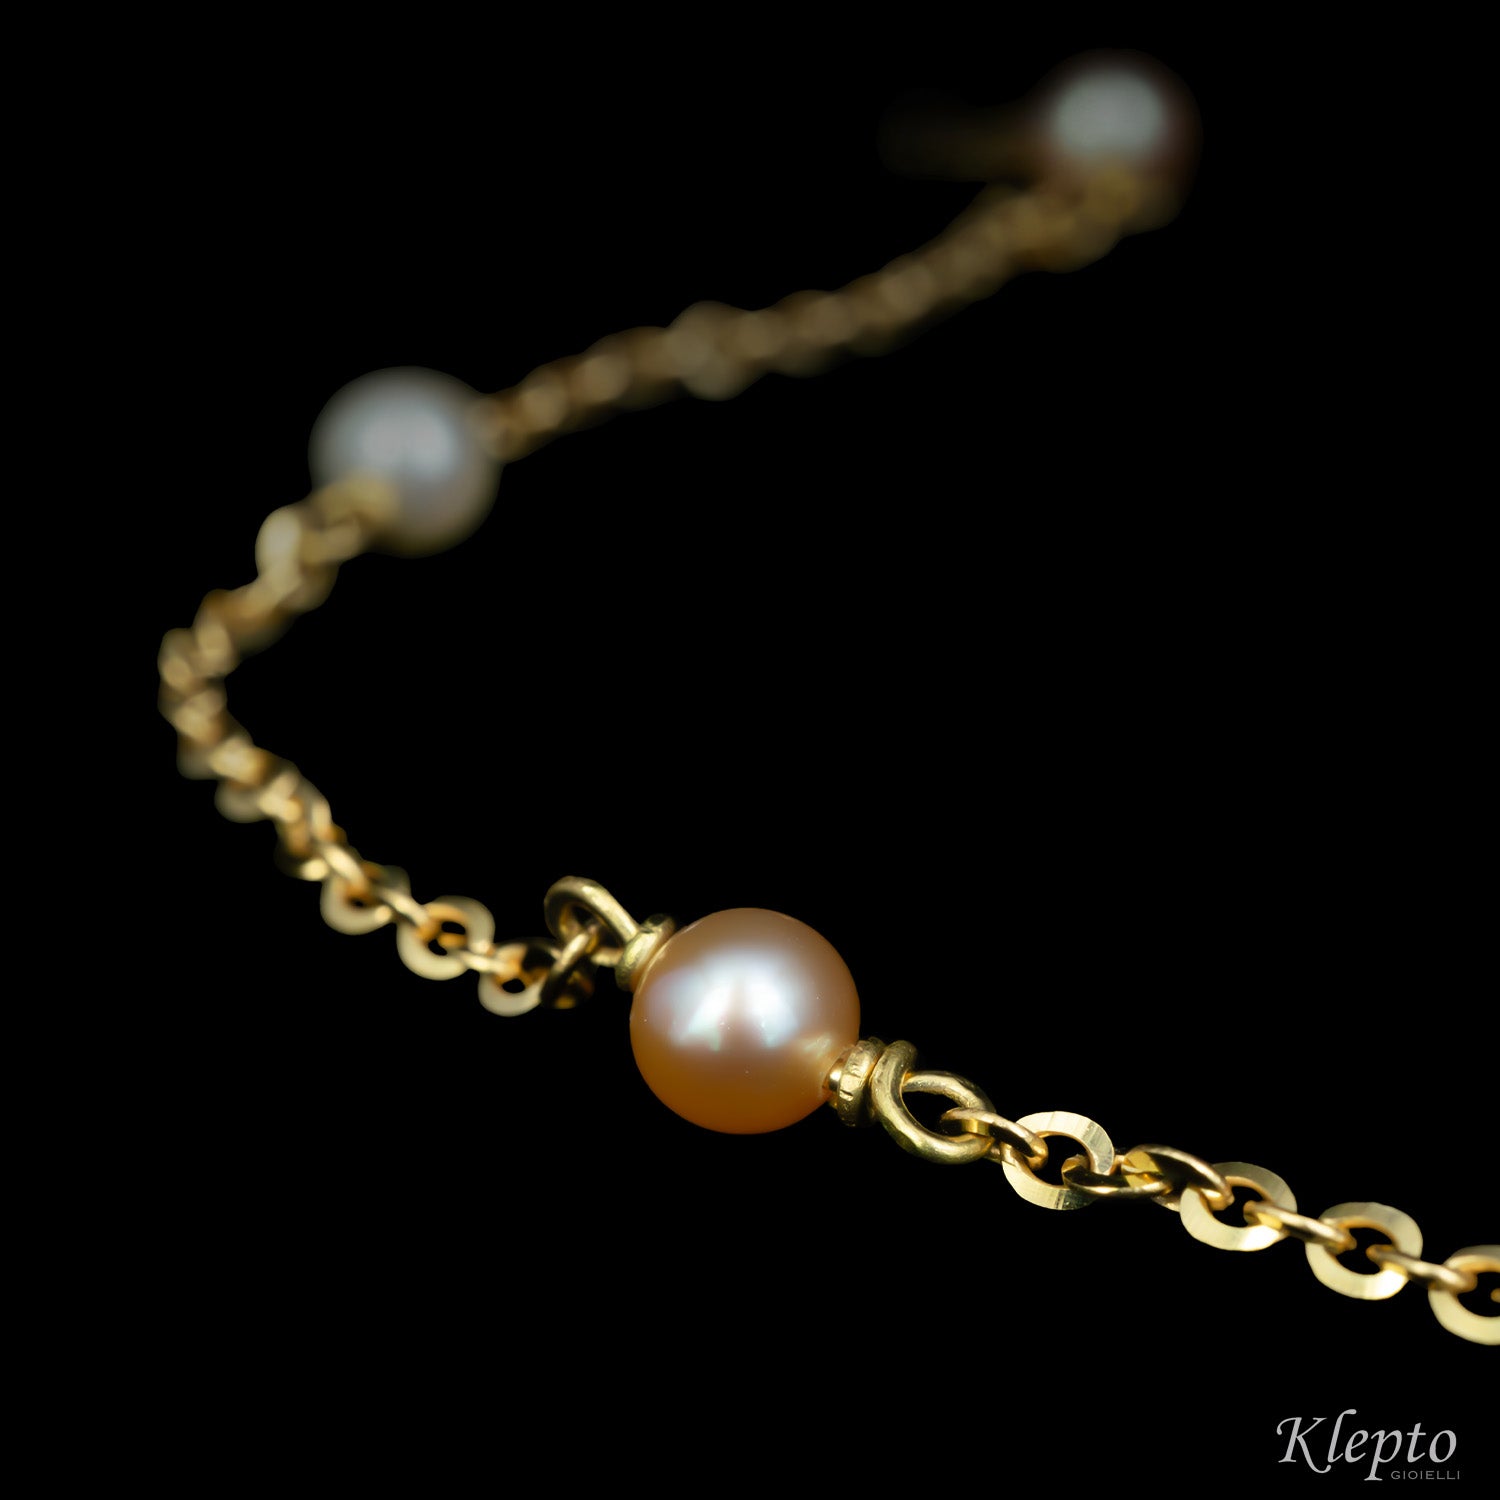 Yellow gold bracelet with lake pearls